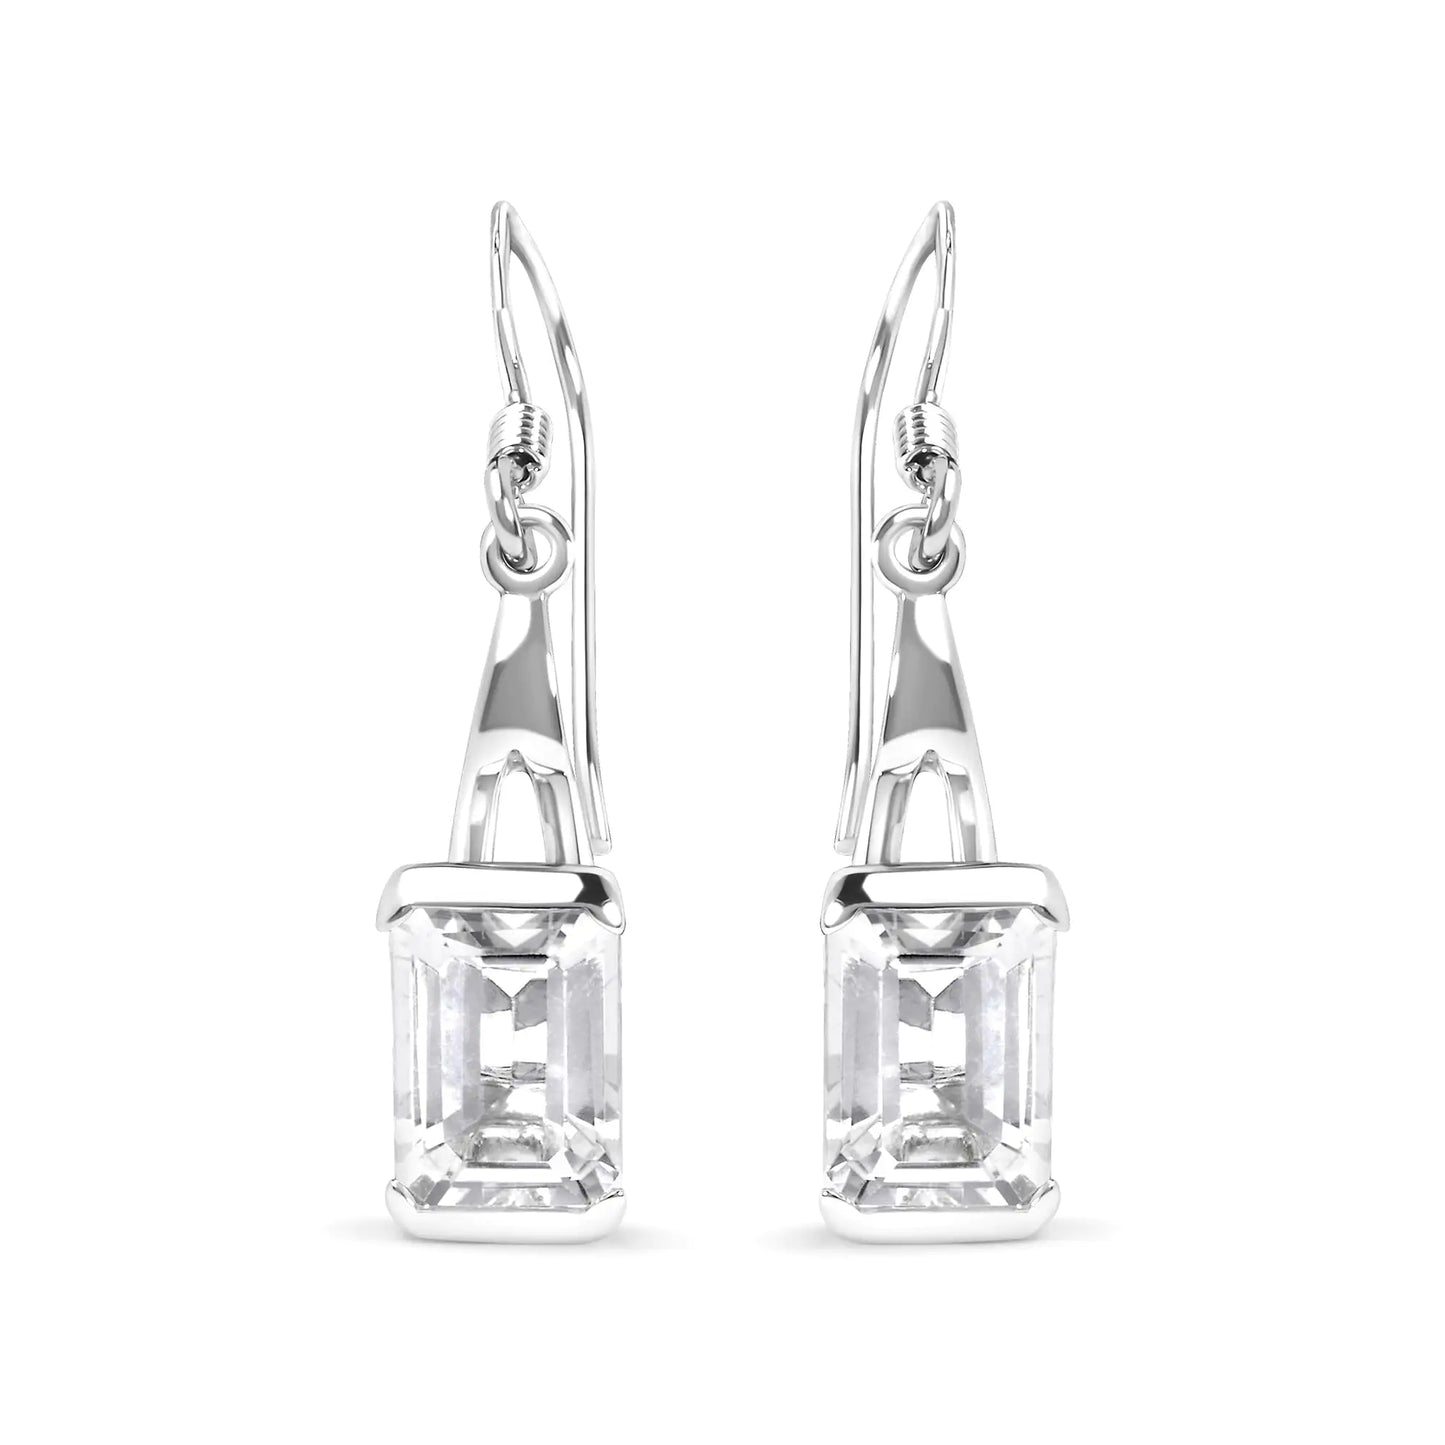 Hanging Solitaire earrings made of 925 sterling Silver weighing 3.0 Carats with emerald cut and White topaz - AAA Quality